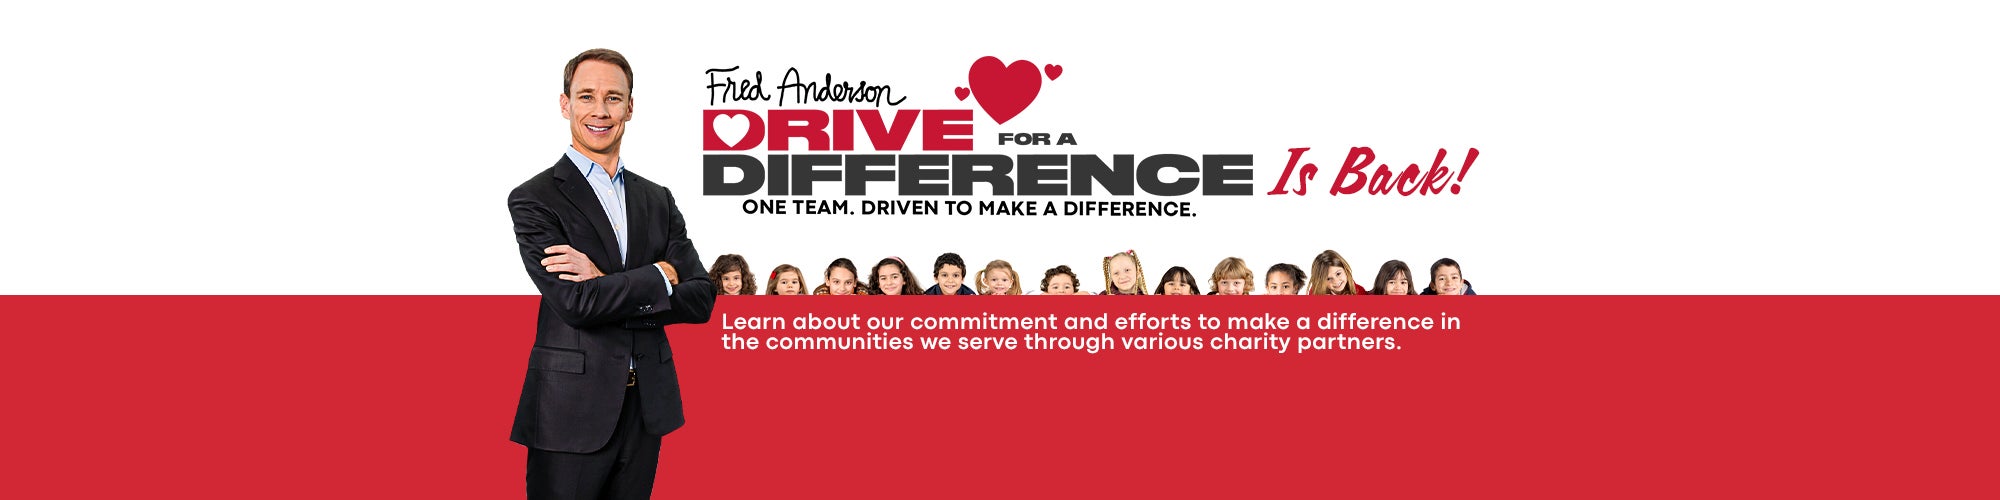 Drive for a Difference